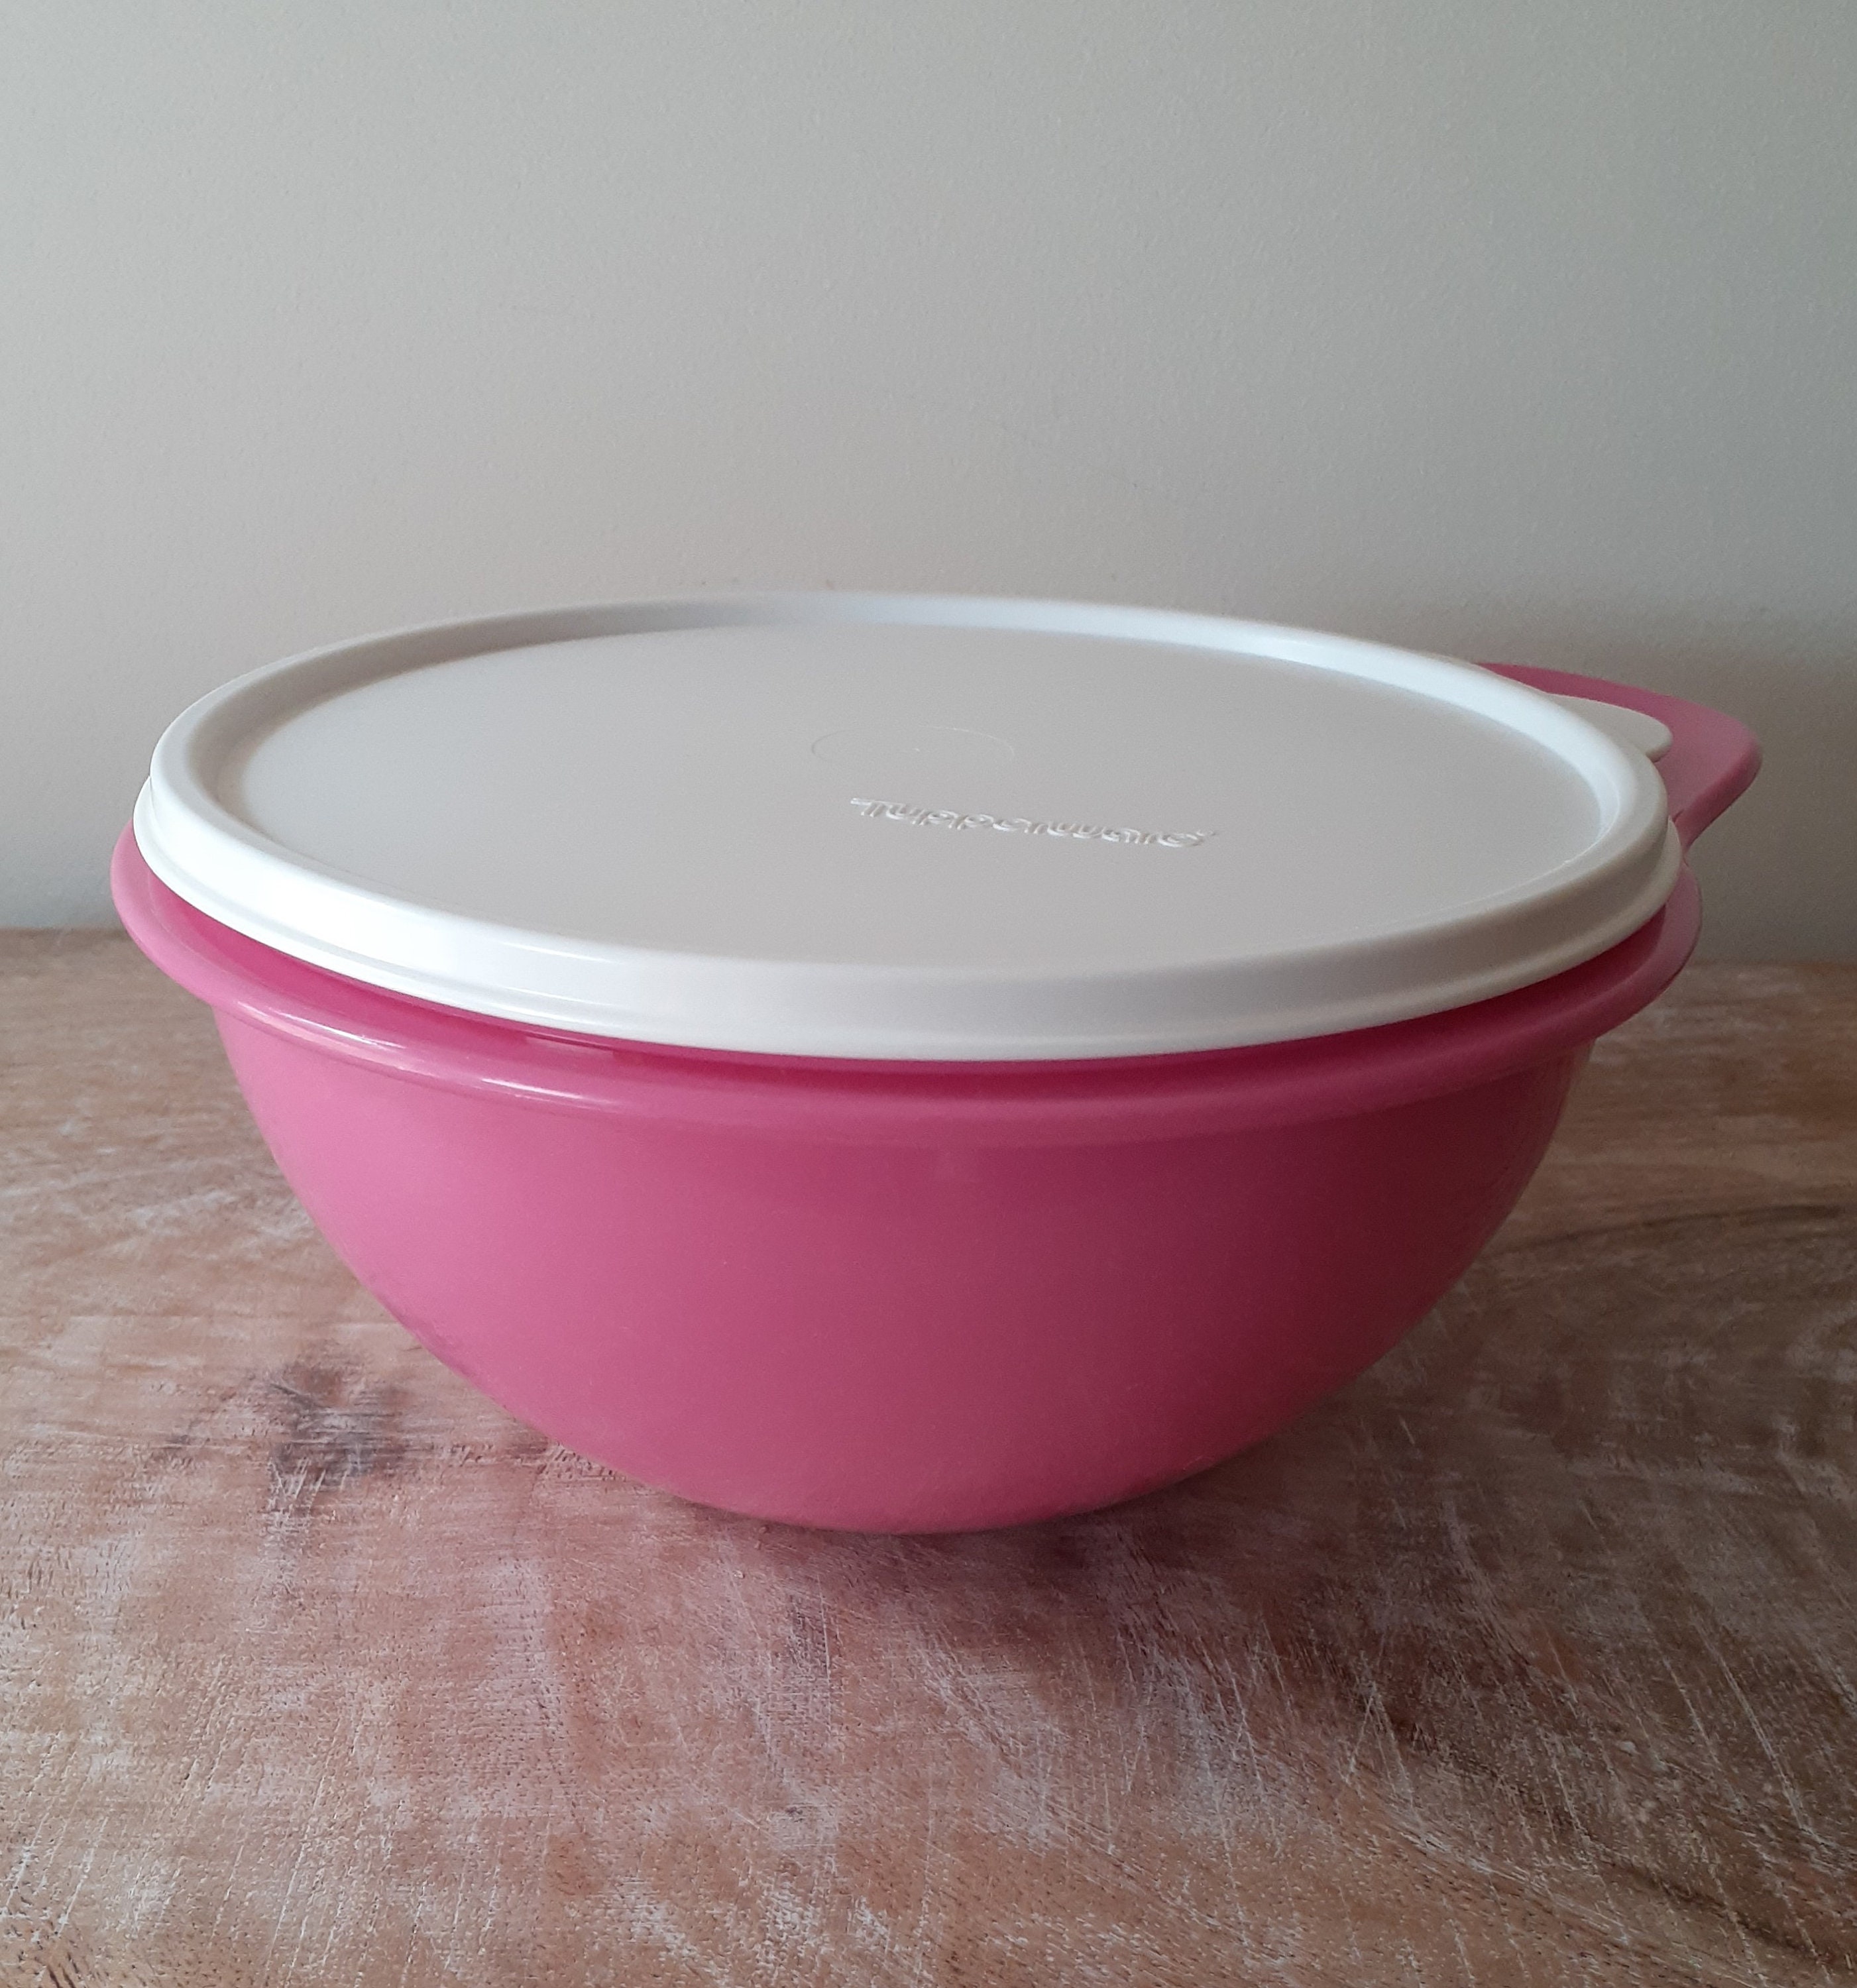 Hot Pink Tupperware Thatsa Bowl, Mixing bowl or food storage with handle,  white lid, 1.4 litres, model 3056B-1